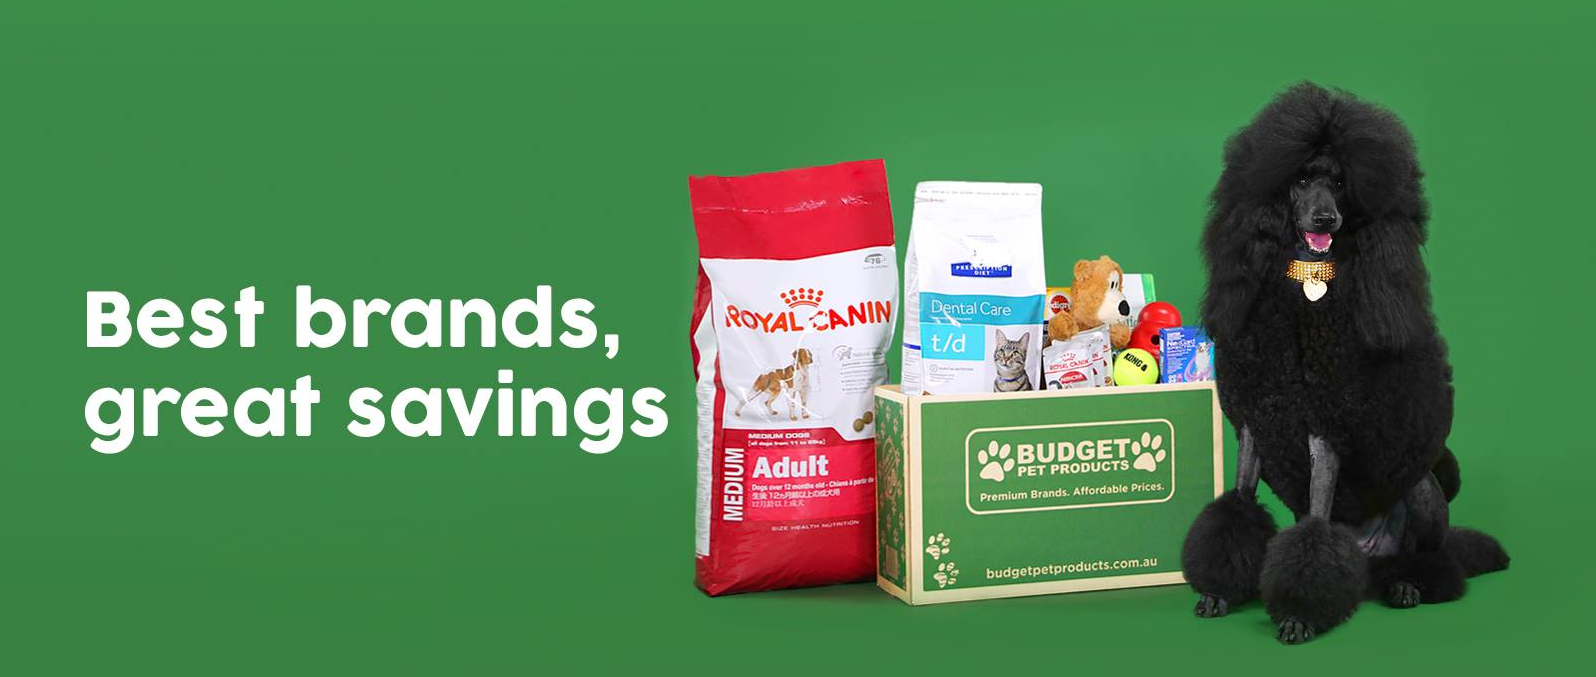 All Budget Pet Products Deals & Promotions